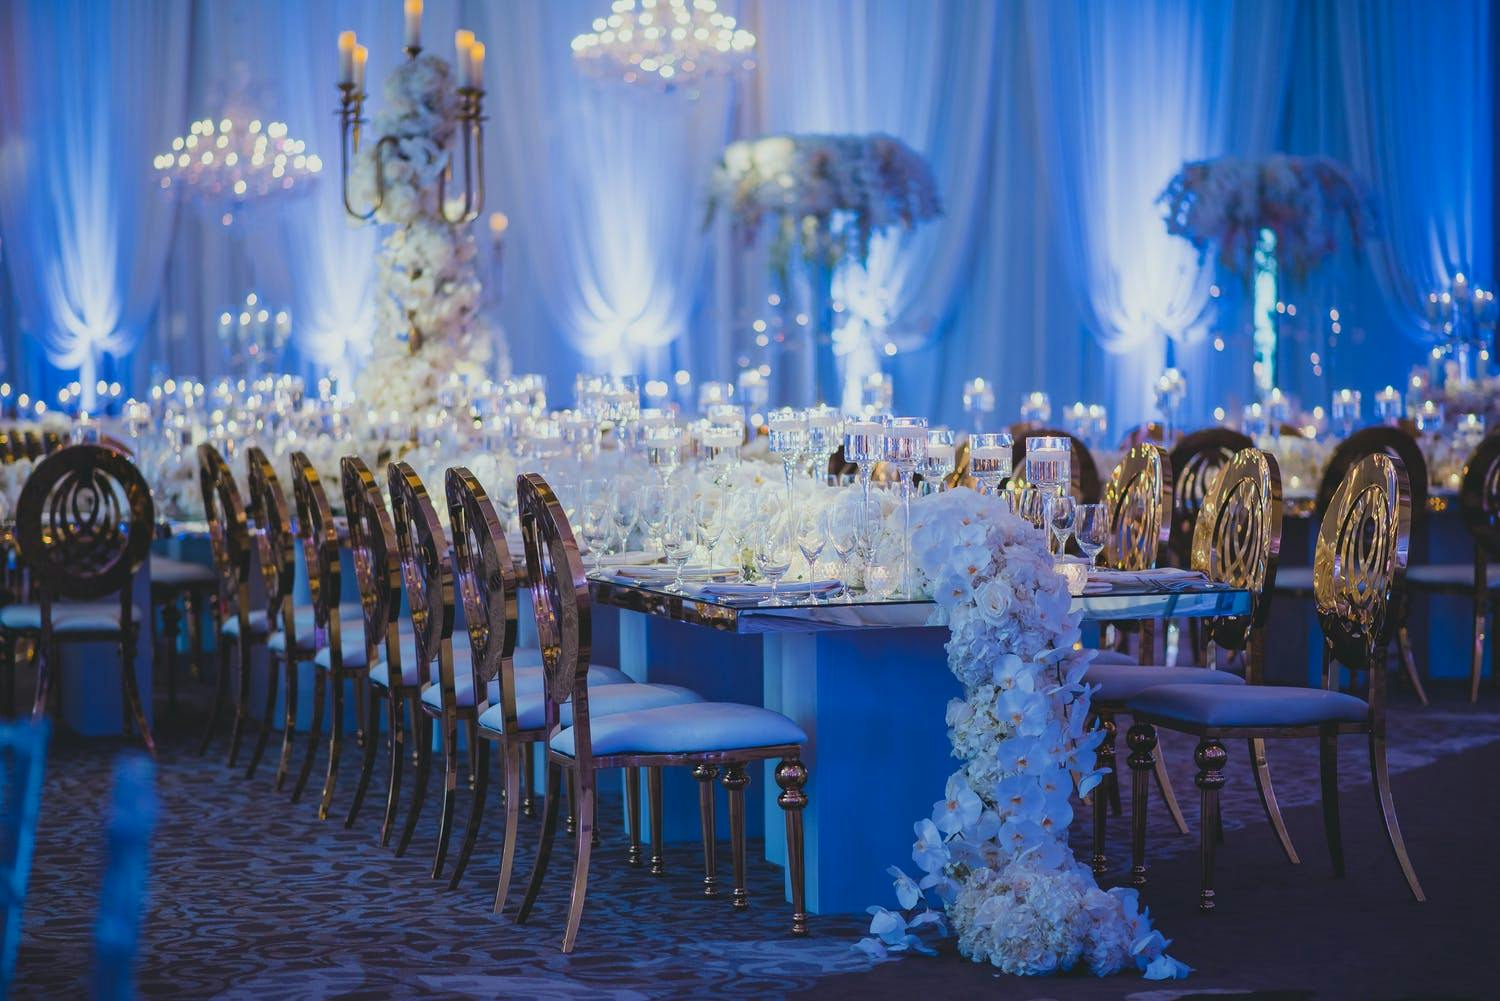 Wedding Reception With Orchid Garland Centerpiece, Gold Seating, and Blue Uplighting | PartySlate